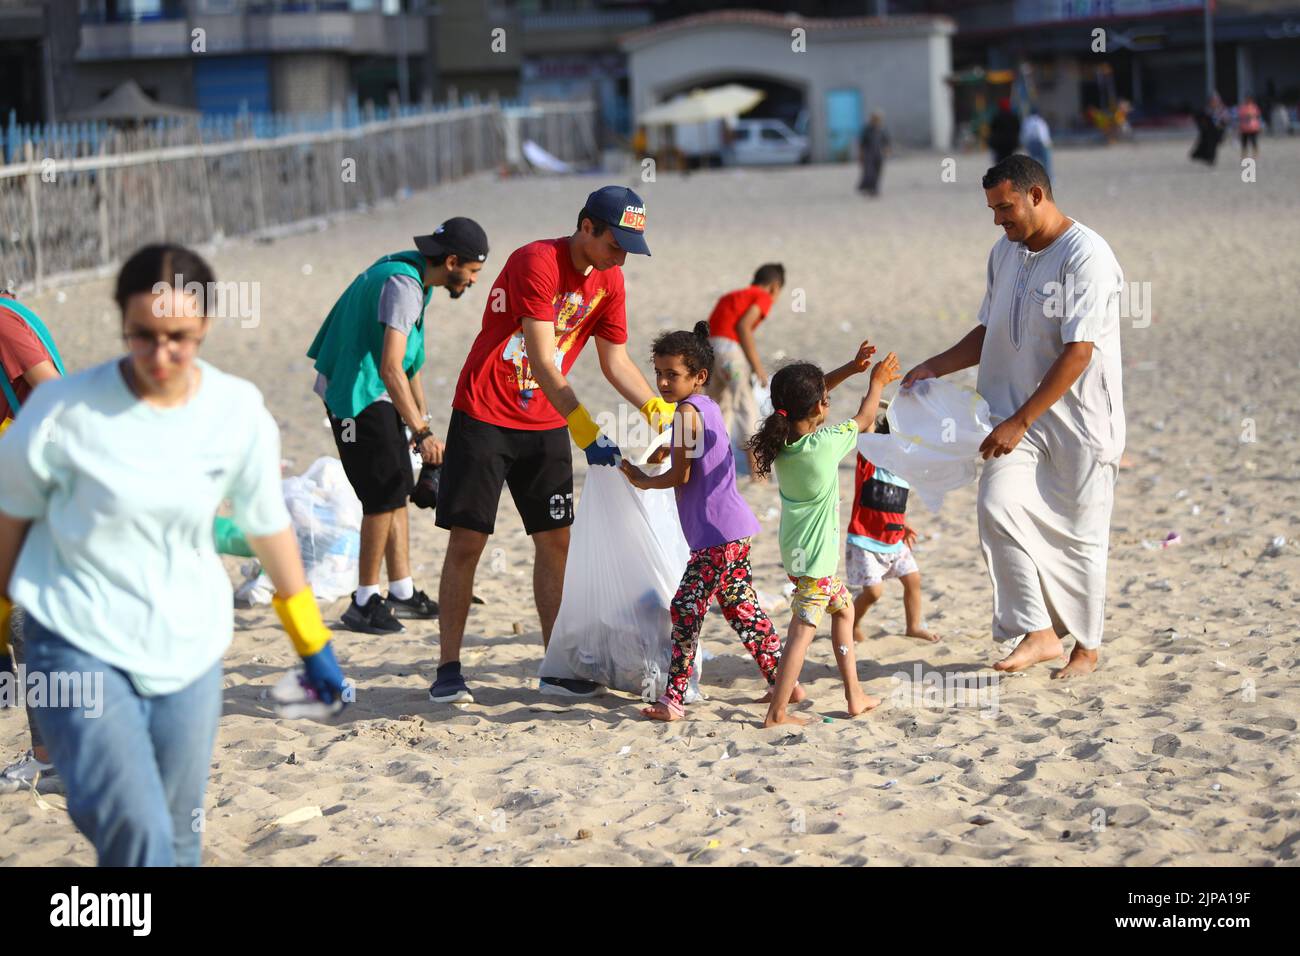 (220816) -- ALEXANDRIA, Aug. 16, 2022 (Xinhua) -- People collect waste from the beach in Alexandria, Egypt, Aug. 13, 2022. On the beaches in the Egyptian city of Alexandria, a group of Egyptian young people are usually seen holding green and white plastic bags to collect the scattering waste. They are participants in a cleanup campaign organized by Banlastic Egypt, an environmental project launched by a group of youth in the Mediterranean city. The project seeks to raise the public's awareness of plastic pollution and how single-use plastic waste harms marine life if it eventually ends up Stock Photo